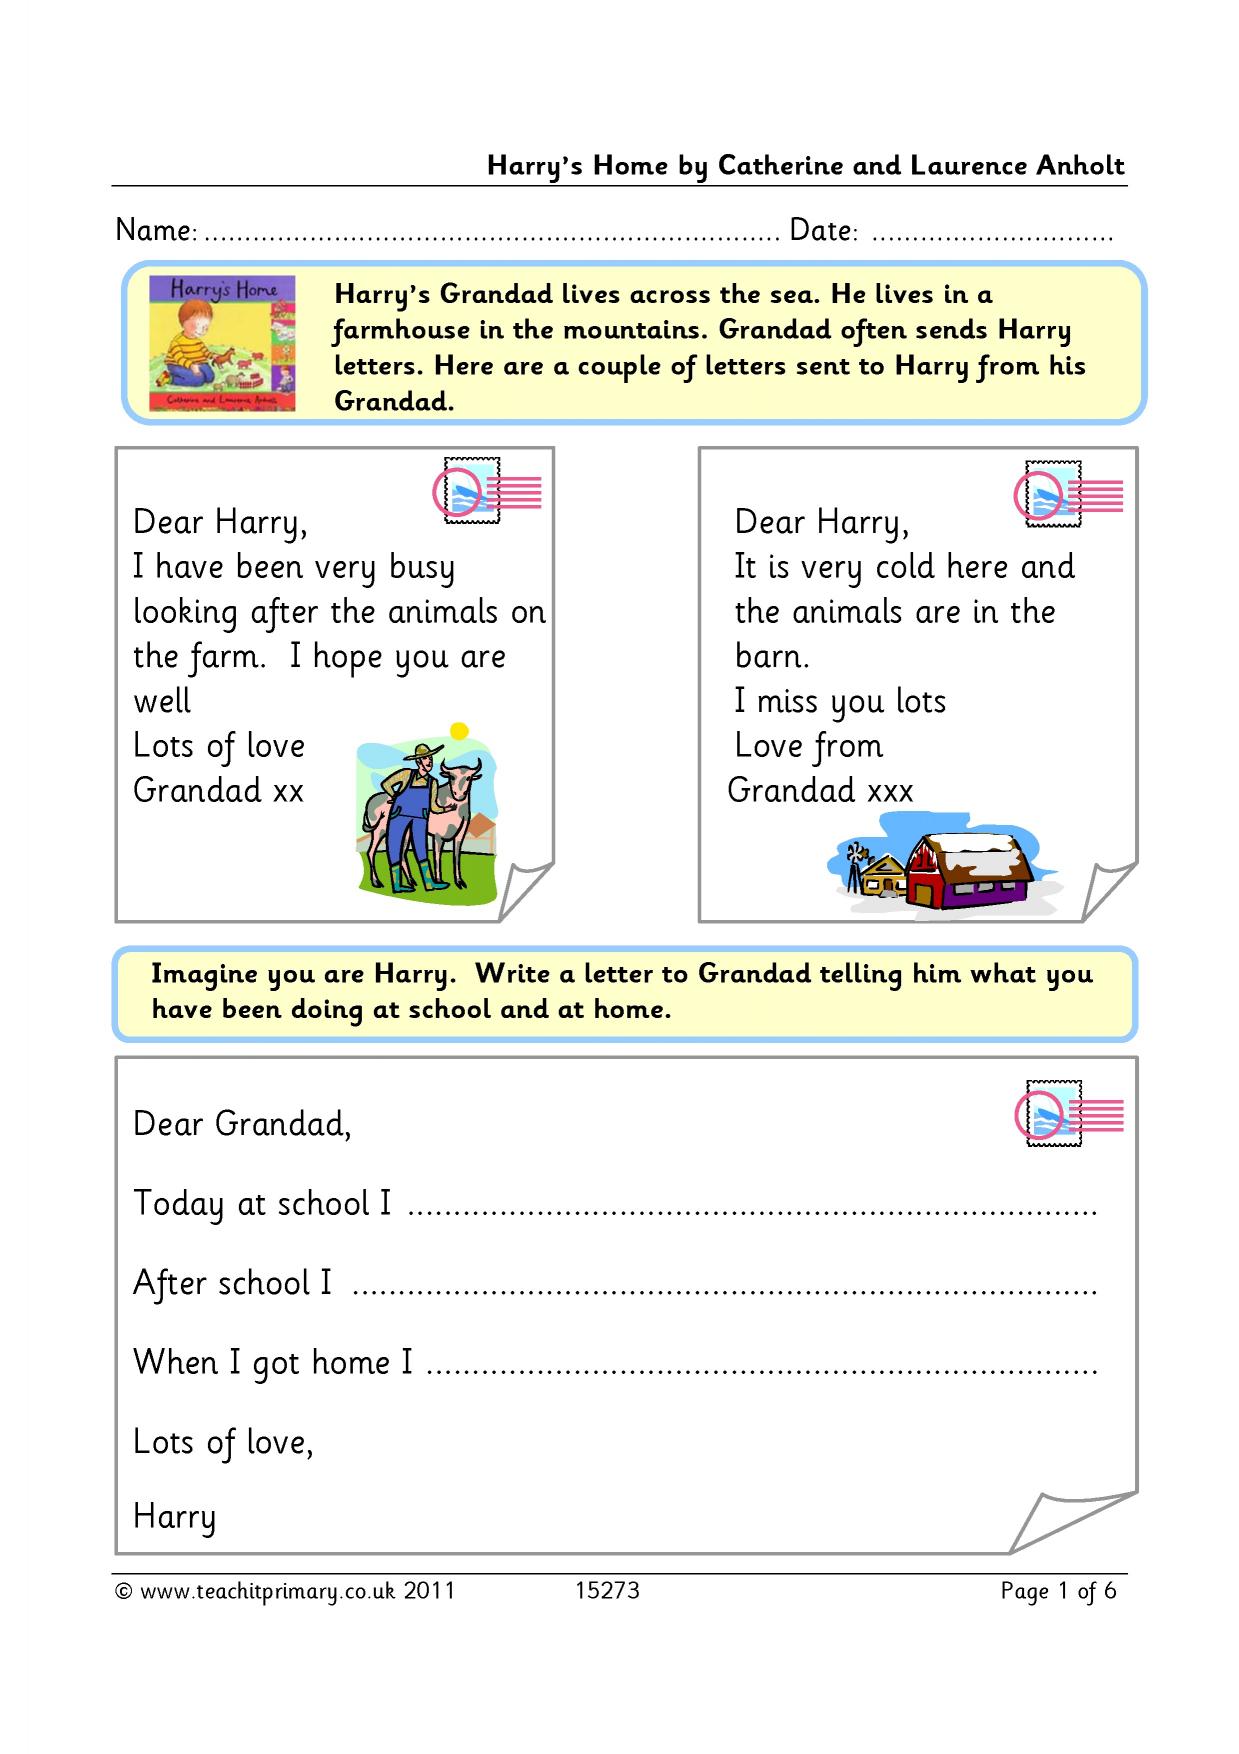 Writing a letter template ks2 english worksheets